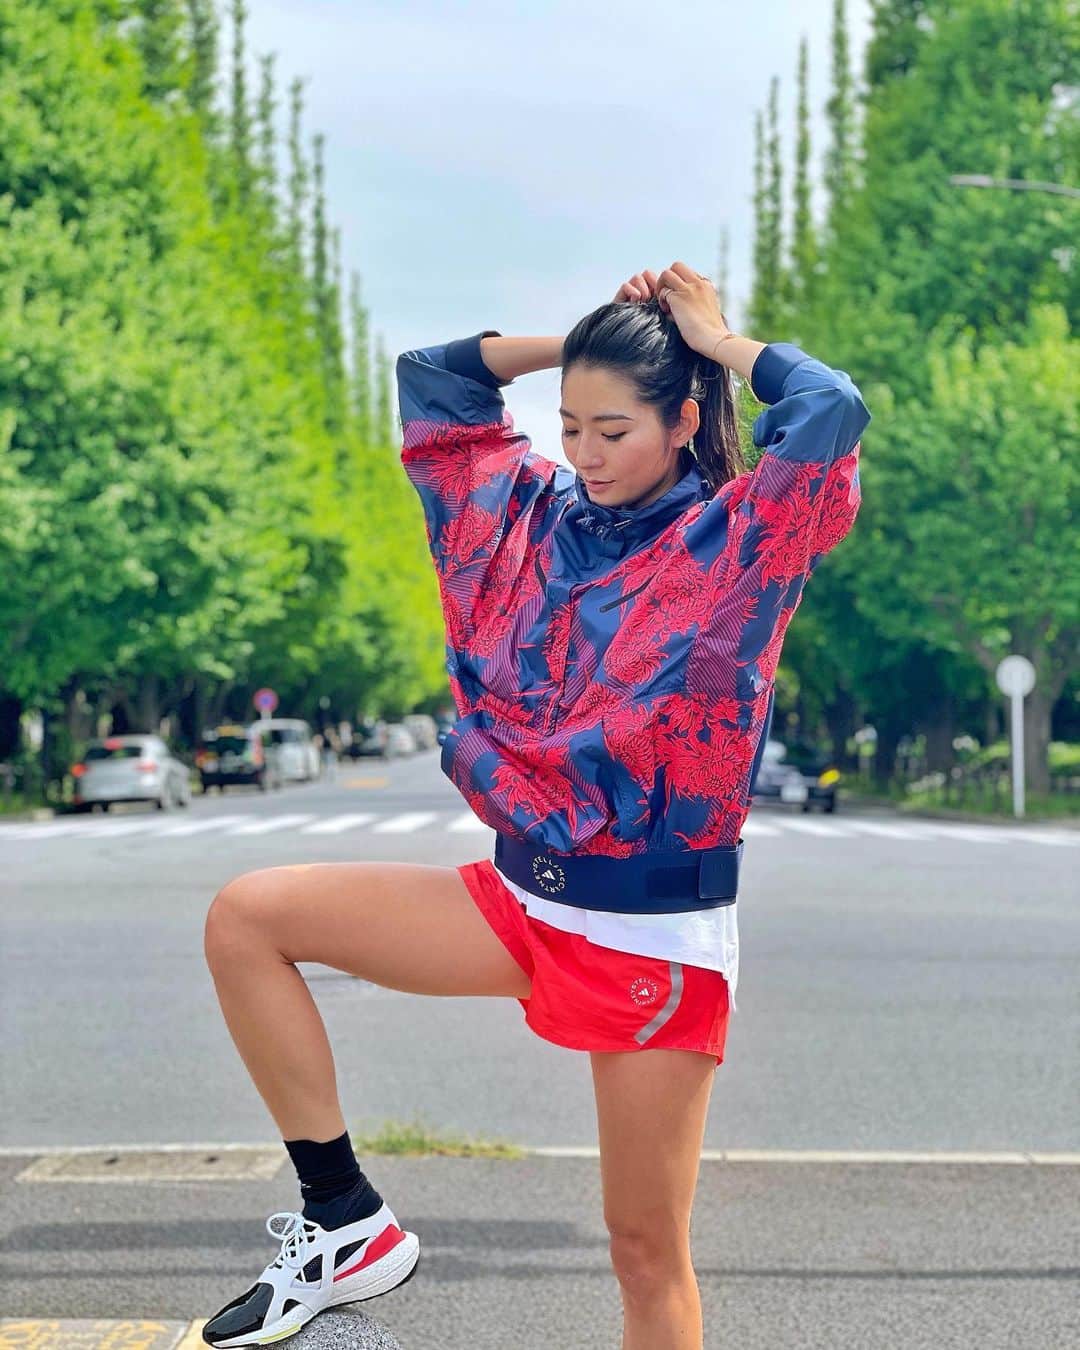 福田萌子さんのインスタグラム写真 - (福田萌子Instagram)「❇️ Run For The Friendship ❇️ challenge is back‼️ I have created a running challenge that I encourage you to run at least 2km every day for friendship for one month‼️ Although some regions are currently under the state of emergency and we probably are physically distanced from each other, we will #ConnectThruSweat everyday with this challenge✊🏻✨  This will be our 3rd time we are having this challenge. The first one happened in Nov 2017, and followed by the 2nd one in Sep 2019🐾 Here we are again😎Let’s encourage each other  especially during these uncertain times🔥🔥 We all have down days that makes you feel vulnerable‼️And that’s also when we need each other’s support🌈✨  I have fostered many relationships with my friends thru running👭The more we run, the more experiences and memories we can share🤲🏻 For yourself, for friendships, and to support each other; I am delighted invite you to join this movement💫We will be sweating together and bonding with each other🤝♥️   【How to join the challenge】  🔹Invite your friends to join this challenge. 👭   🔹Run 2KM everyday /May 1st to 31st🏃‍♀️💥  (you can, of course, run more than 2KM if you want, and it doesn't matter if you run slowly! The key is to keep working towards the goal. ⚠️💯 I encourage you to think of your friends when you feel low. Your friends maybe are dedicate their run to you! 👊🏻✨)   🔹Share love on social media🧚‍♀️Tag your friends using two hashtags 🔥 #ConnectThruSweat #RunForTheFriendship  (More than happy for you to tag me if you can't find a friend. I'll dedicate my run to you 😊‼)   🔹Let's run 10km with me on 31st May🏃‍♀️  (We will run together, if we can meet. If not, I will livestream my run thru my IG account😊)  The time and meeting place will be announced thru my IG stories and posts🔍  The key takeaway I would like to share through this challenge is that you feel mentally & physically stronger when you add exercise into your routine😊  #run #running #runningchallenge」4月27日 19時31分 - moekofukuda